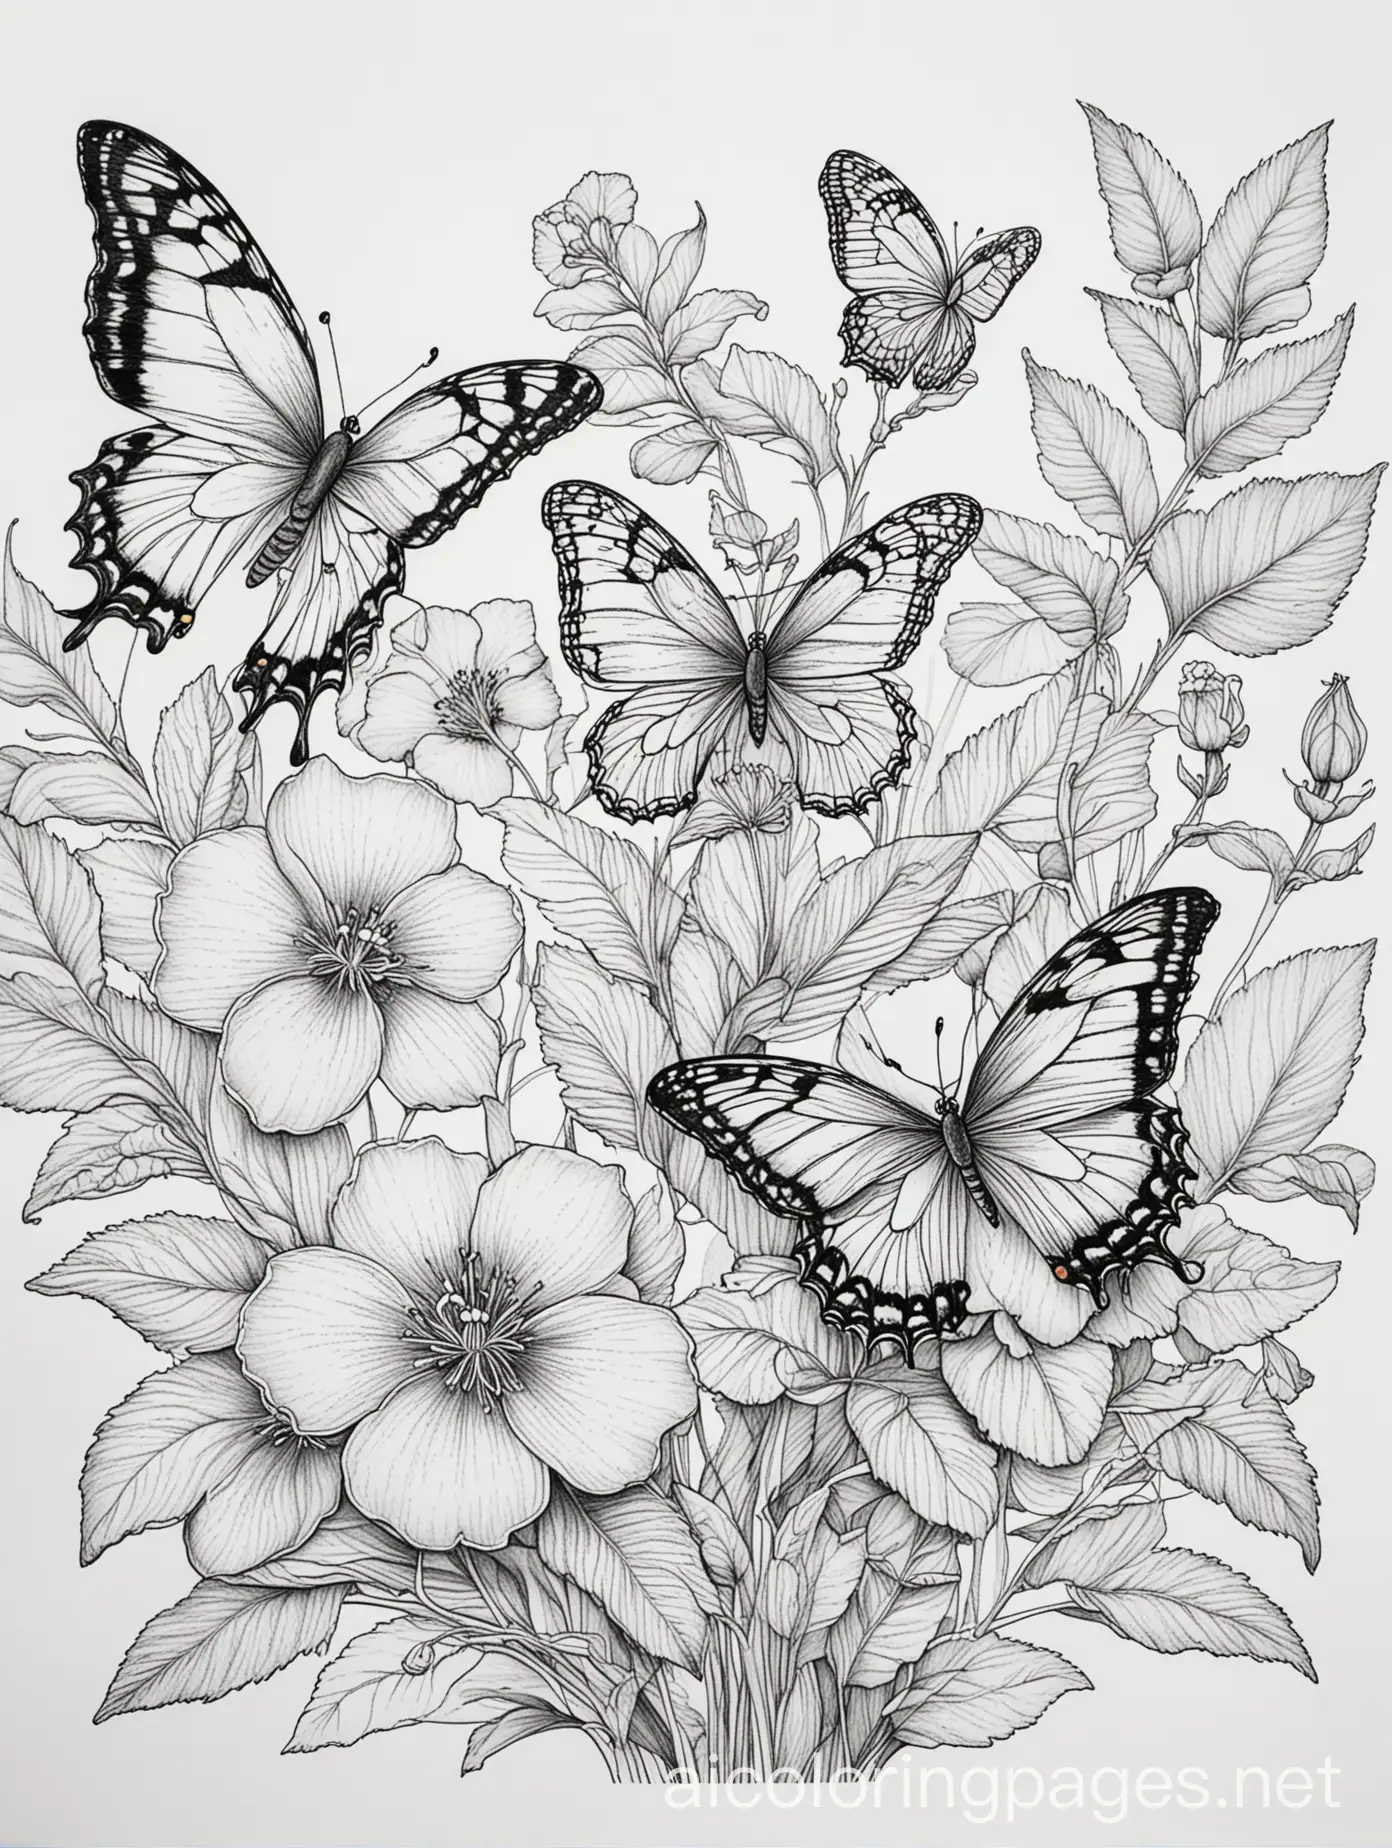 violets and butterflies, Coloring Page, black and white, line art, white background, Simplicity, Ample White Space. The background of the coloring page is plain white to make it easy for young children to color within the lines. The outlines of all the subjects are easy to distinguish, making it simple for kids to color without too much difficulty